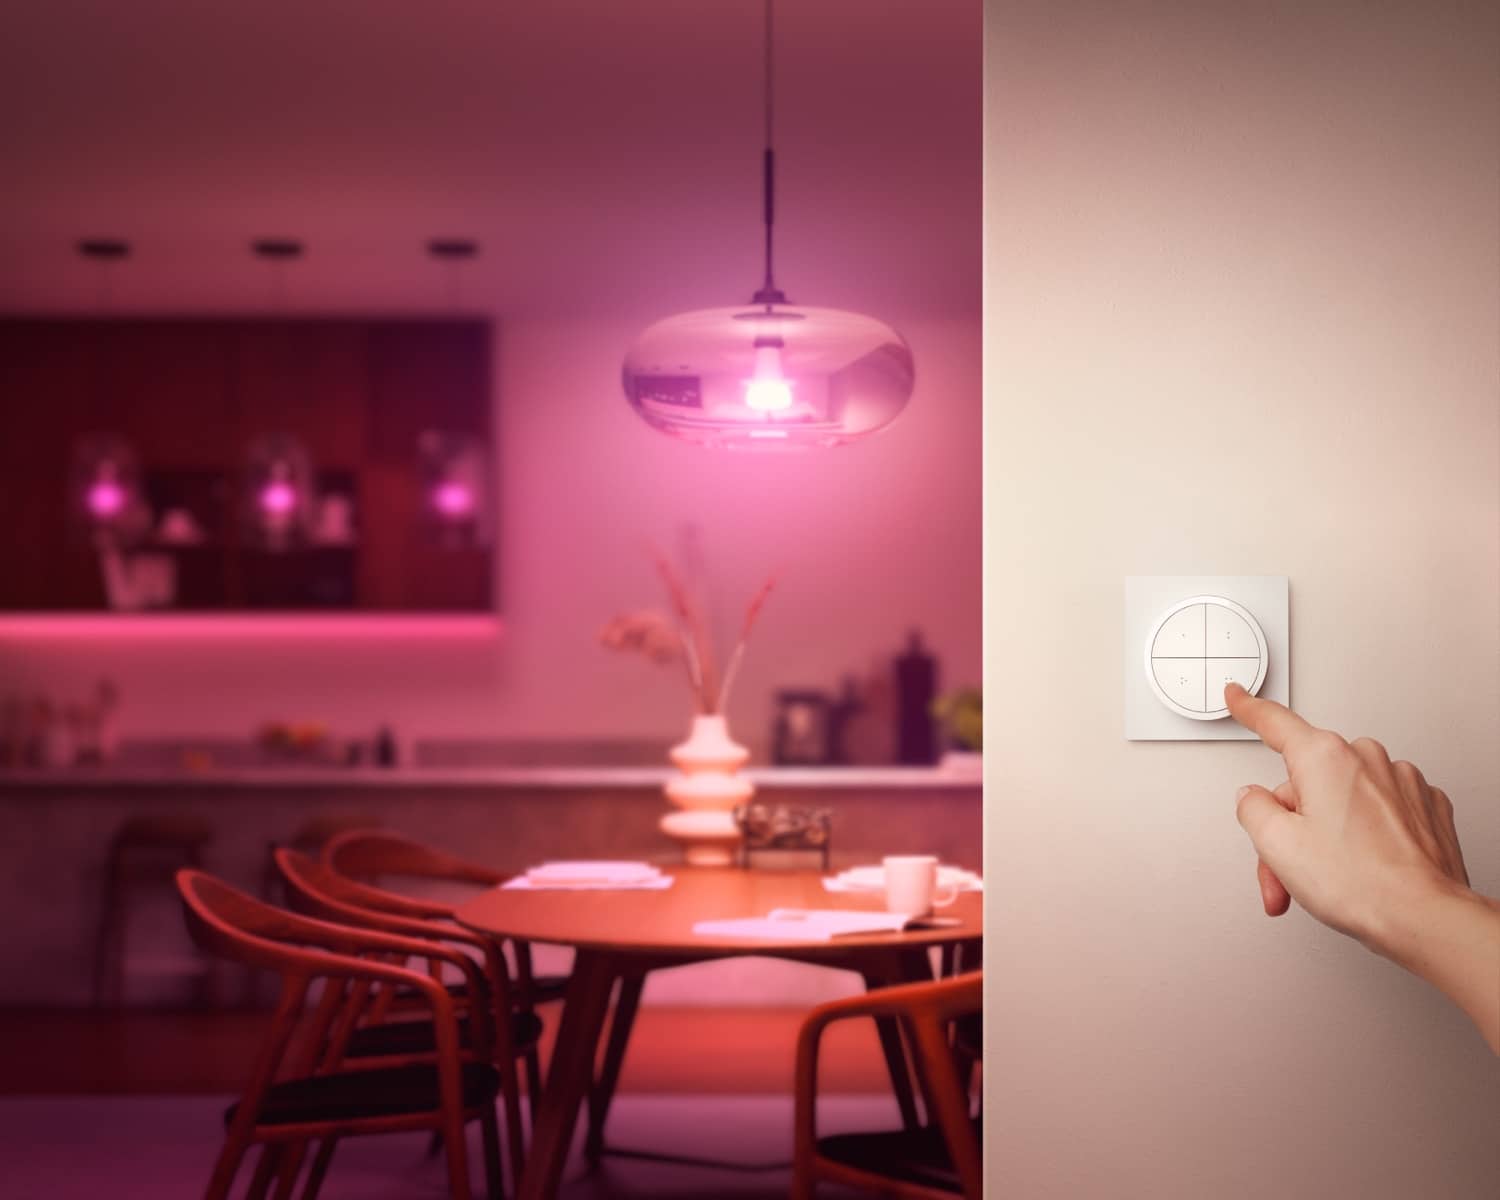 Hueblog: Black Friday at Philips Hue with up to 30% discount